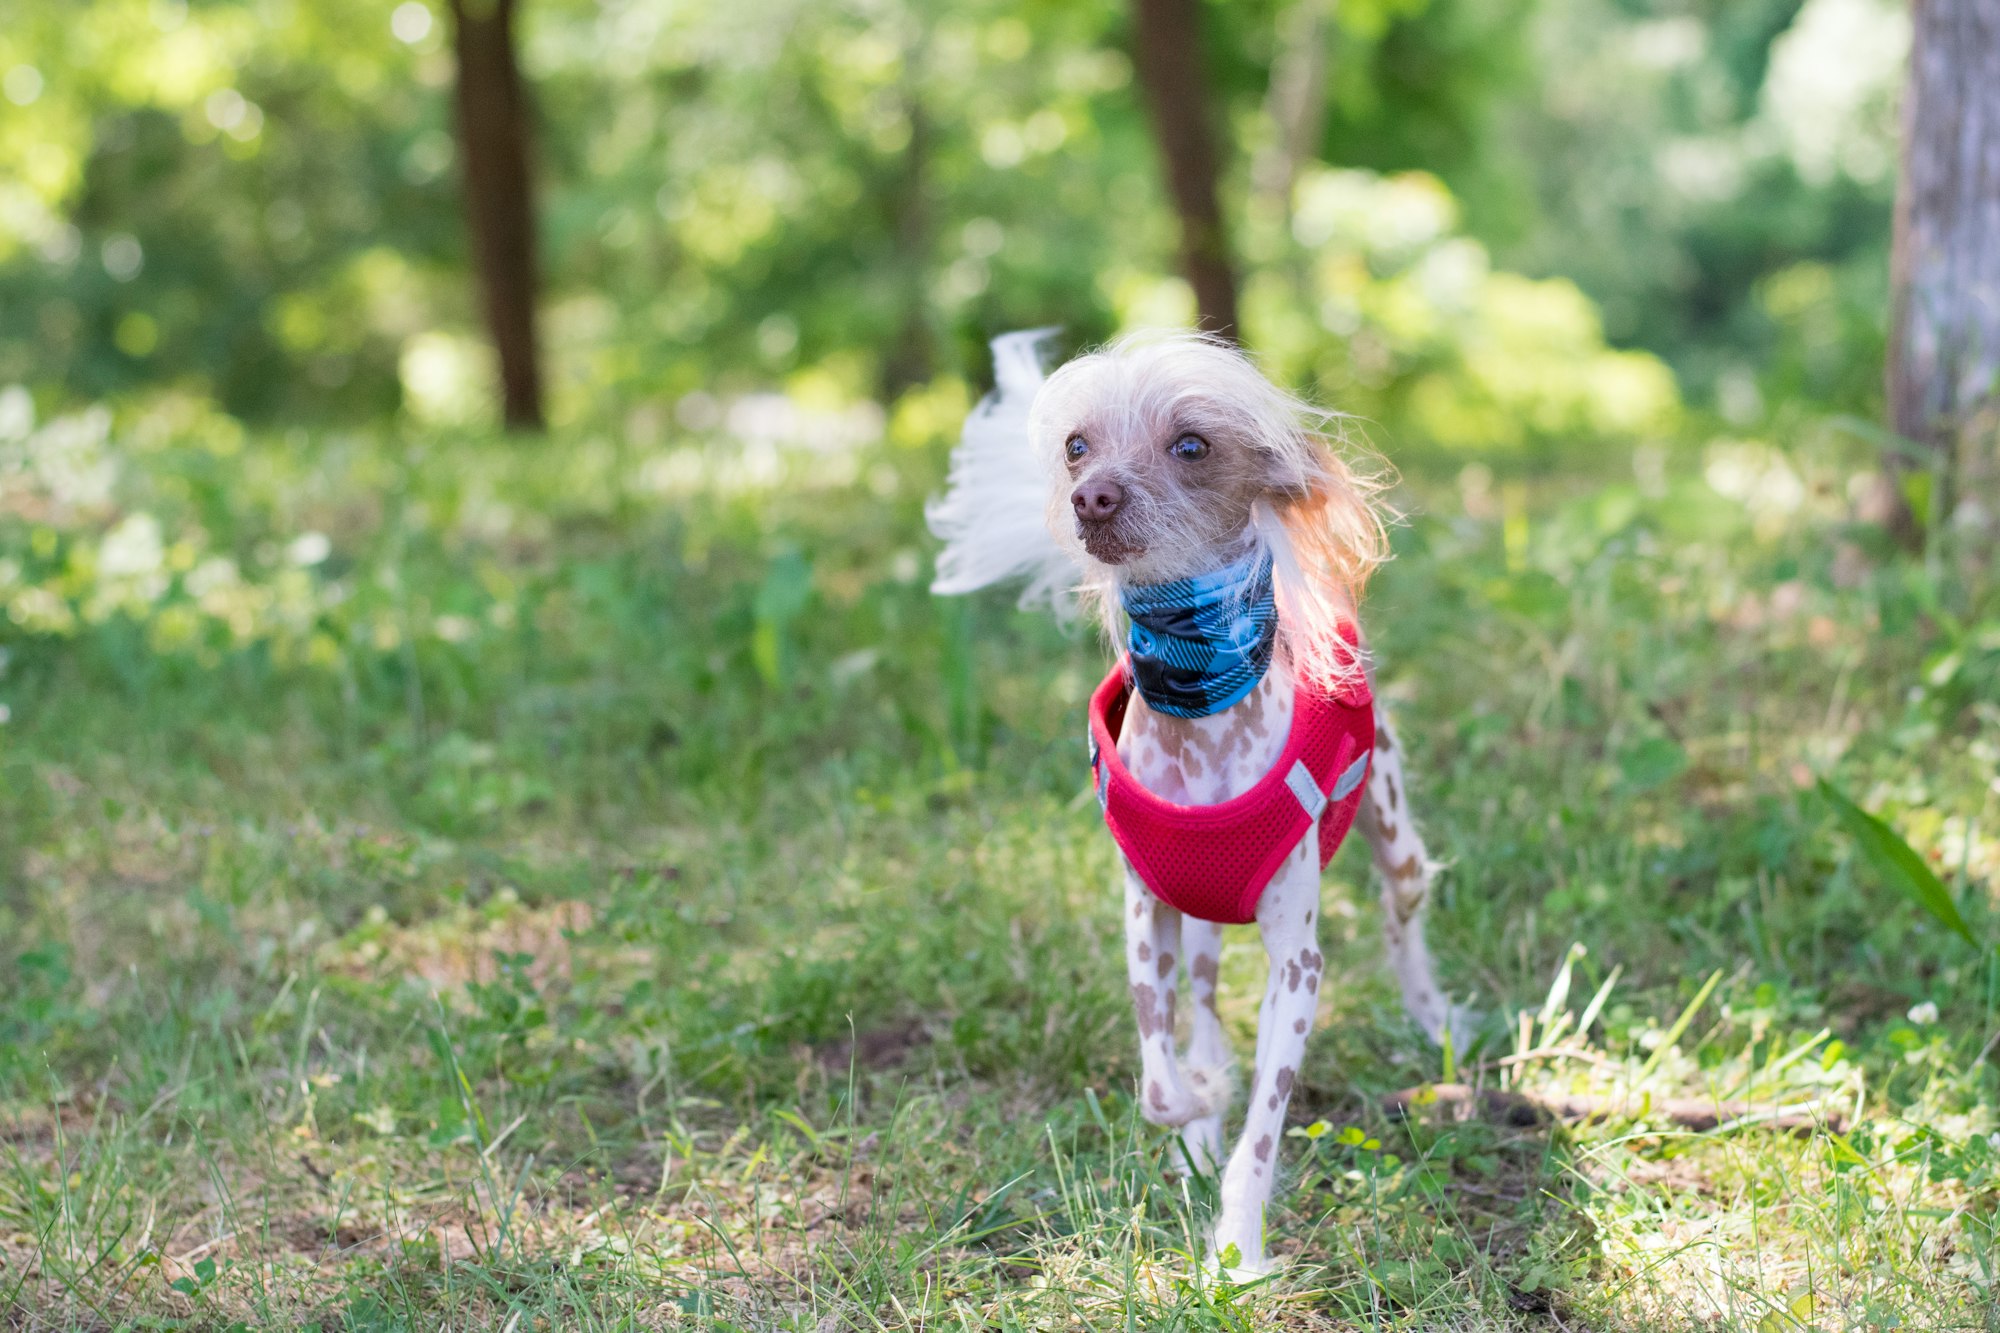 Photo shoot with a Chinese Crested dog name Finn.